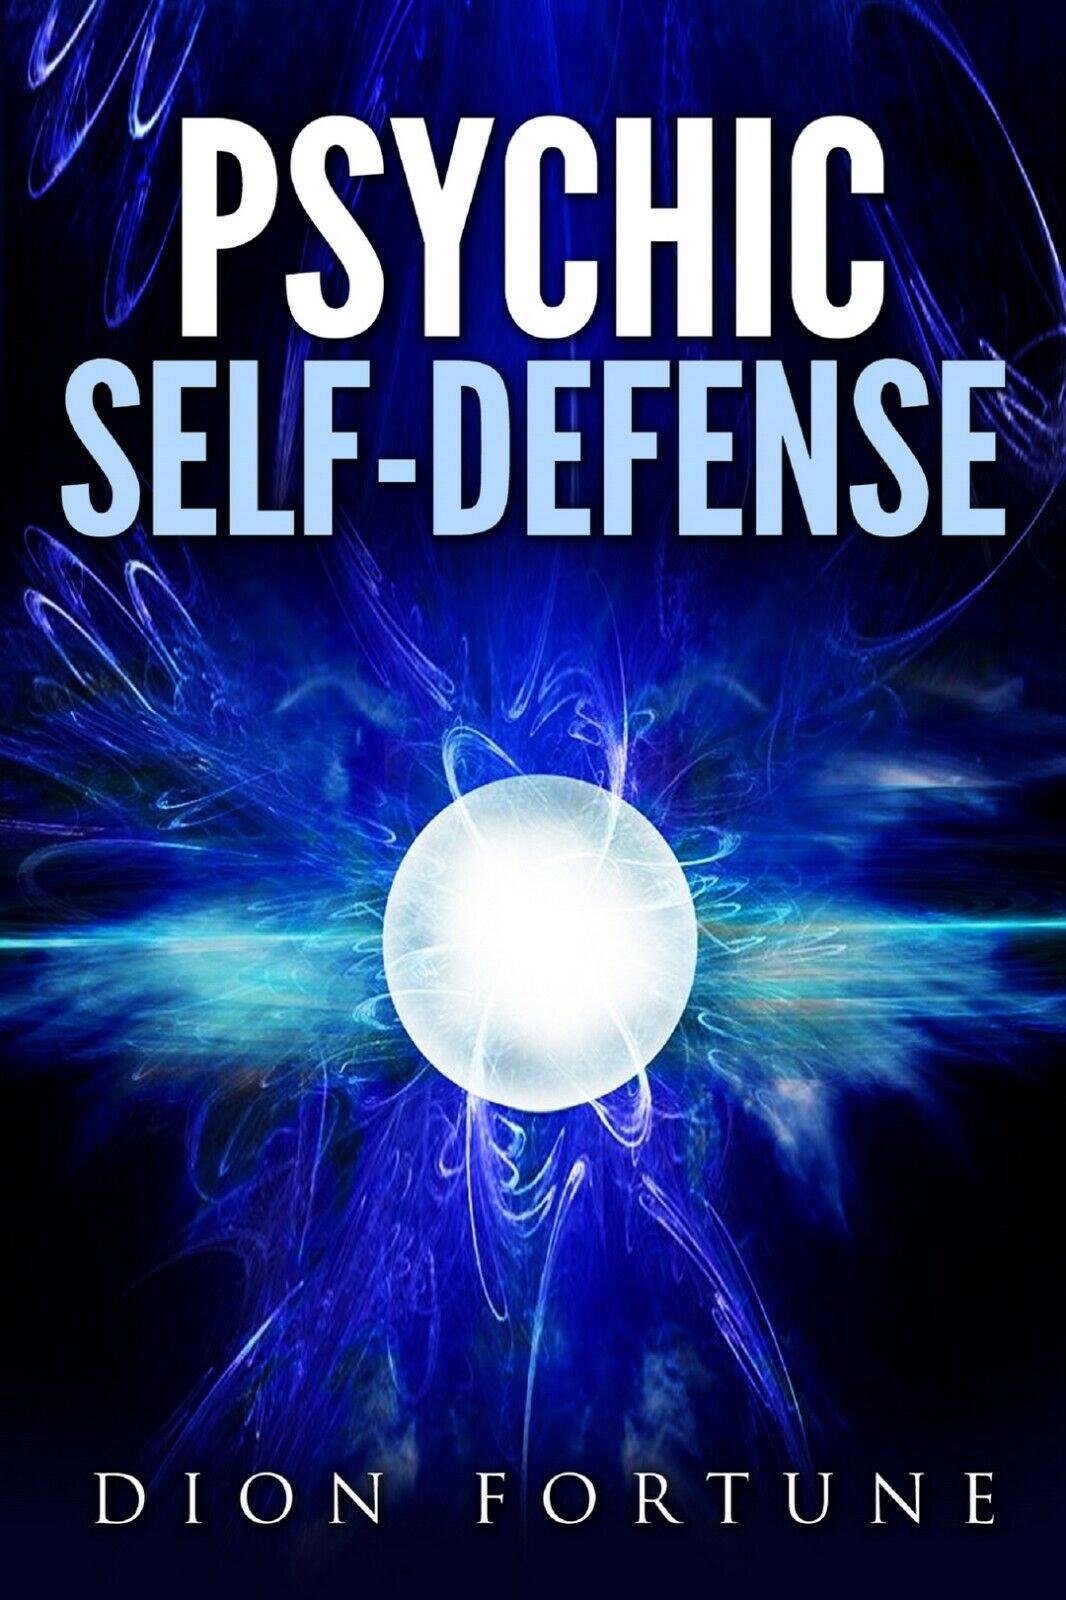 Psychic self-defense: The Classic Instruction Manual for Protecting Yourself